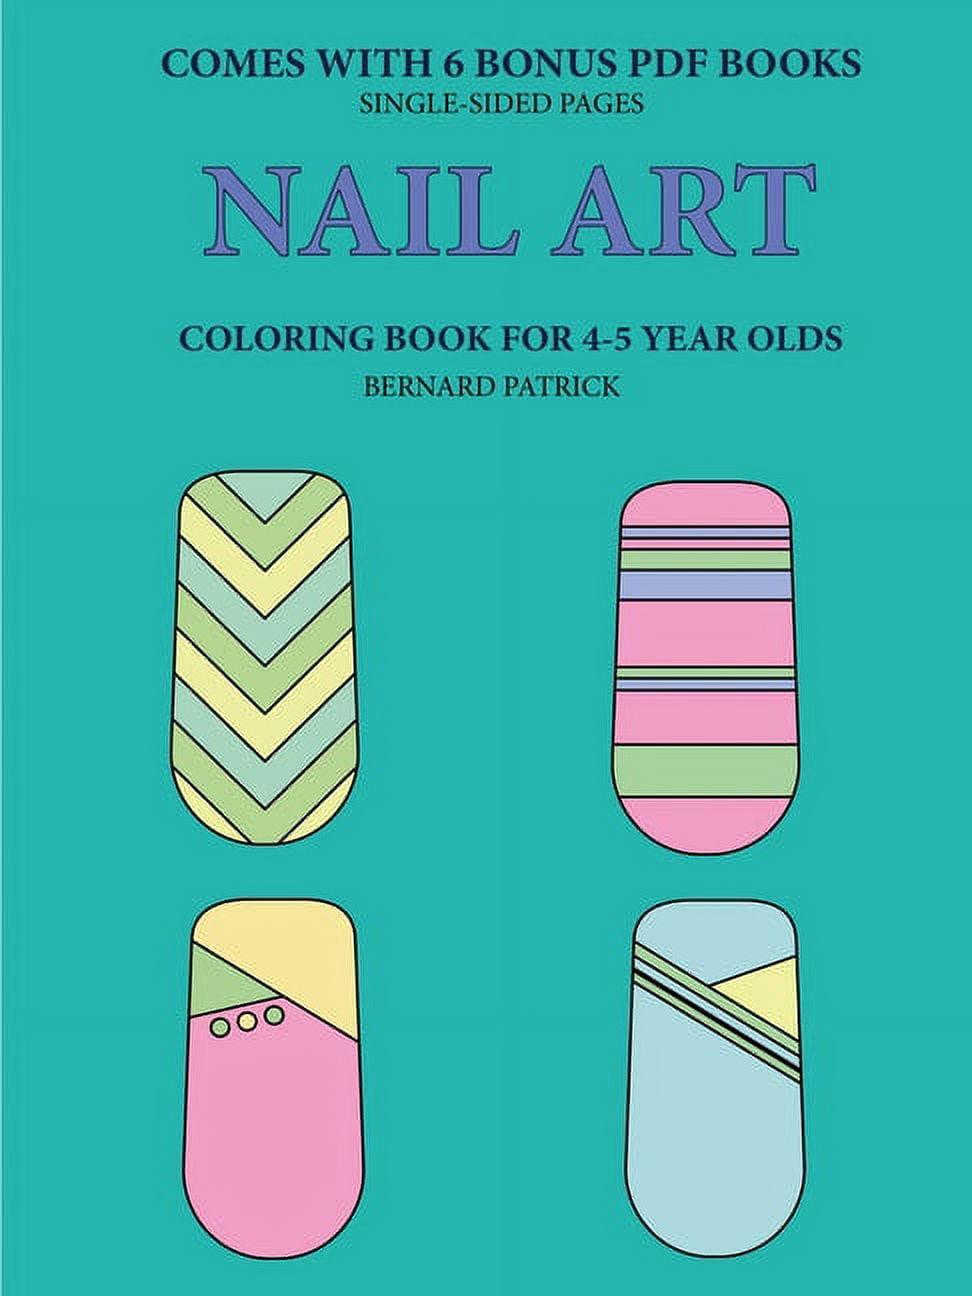 Coloring book for